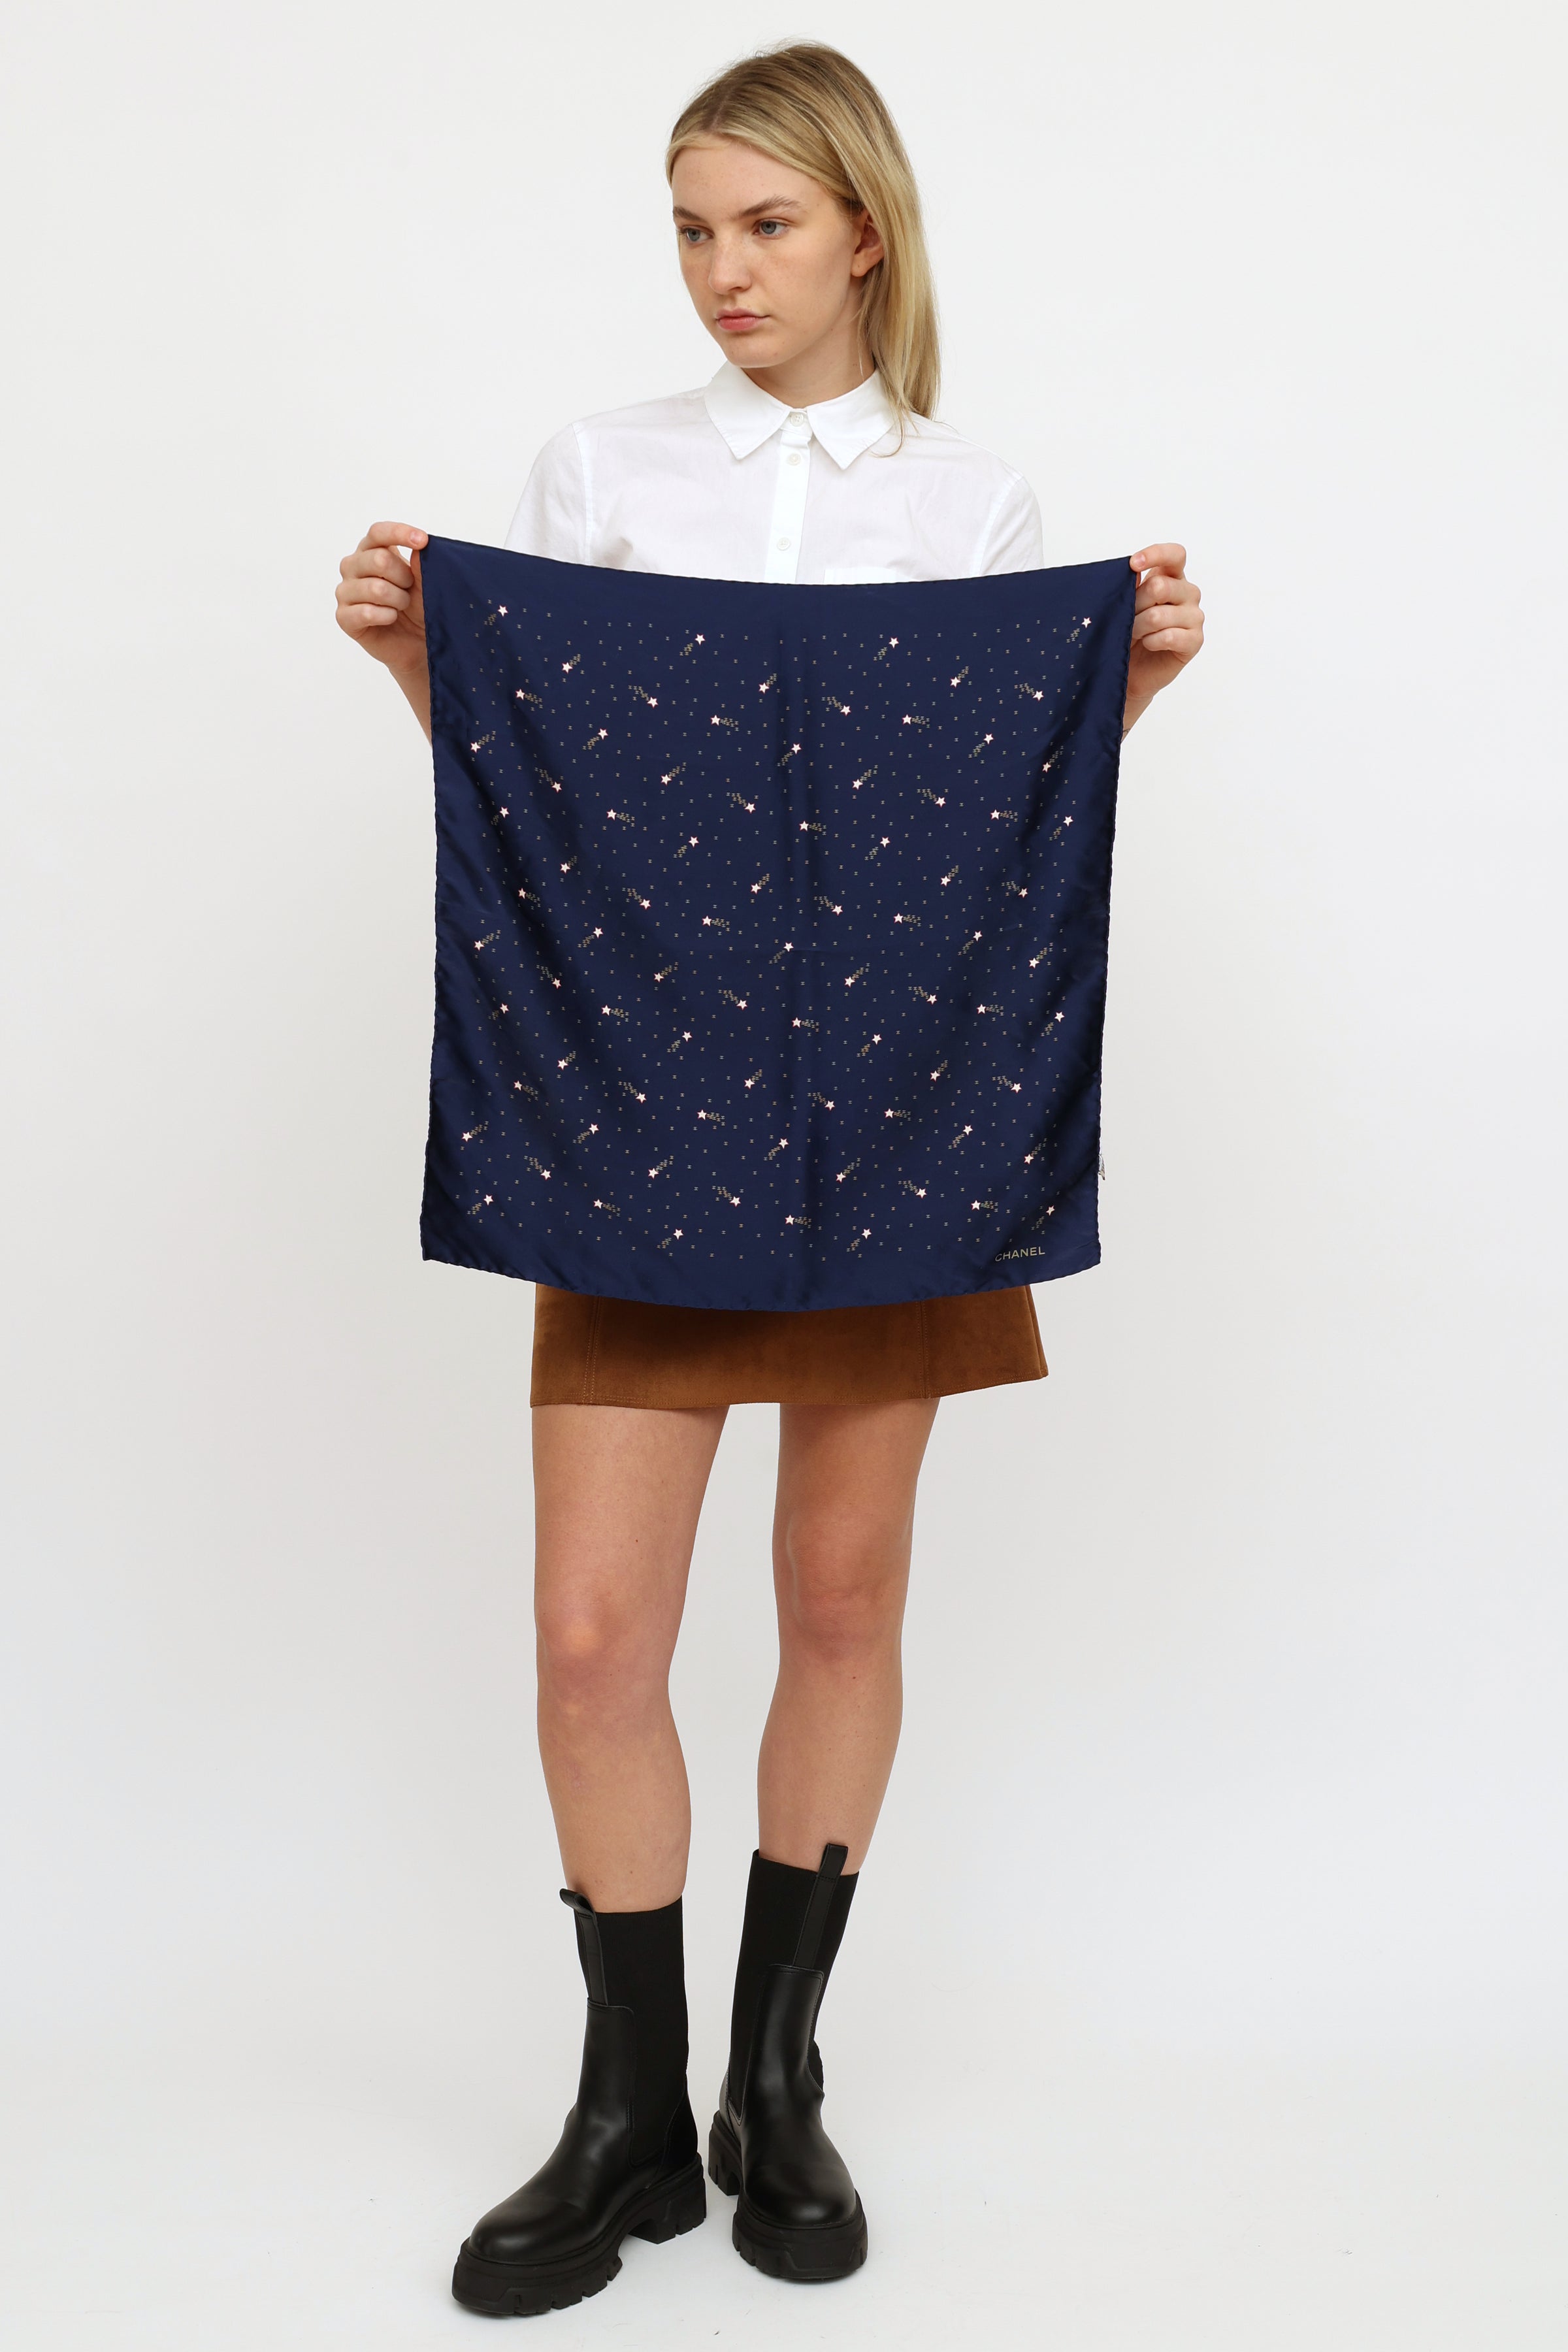 Chanel // Navy Shooting Star Vintage Silk Scarf – VSP Consignment